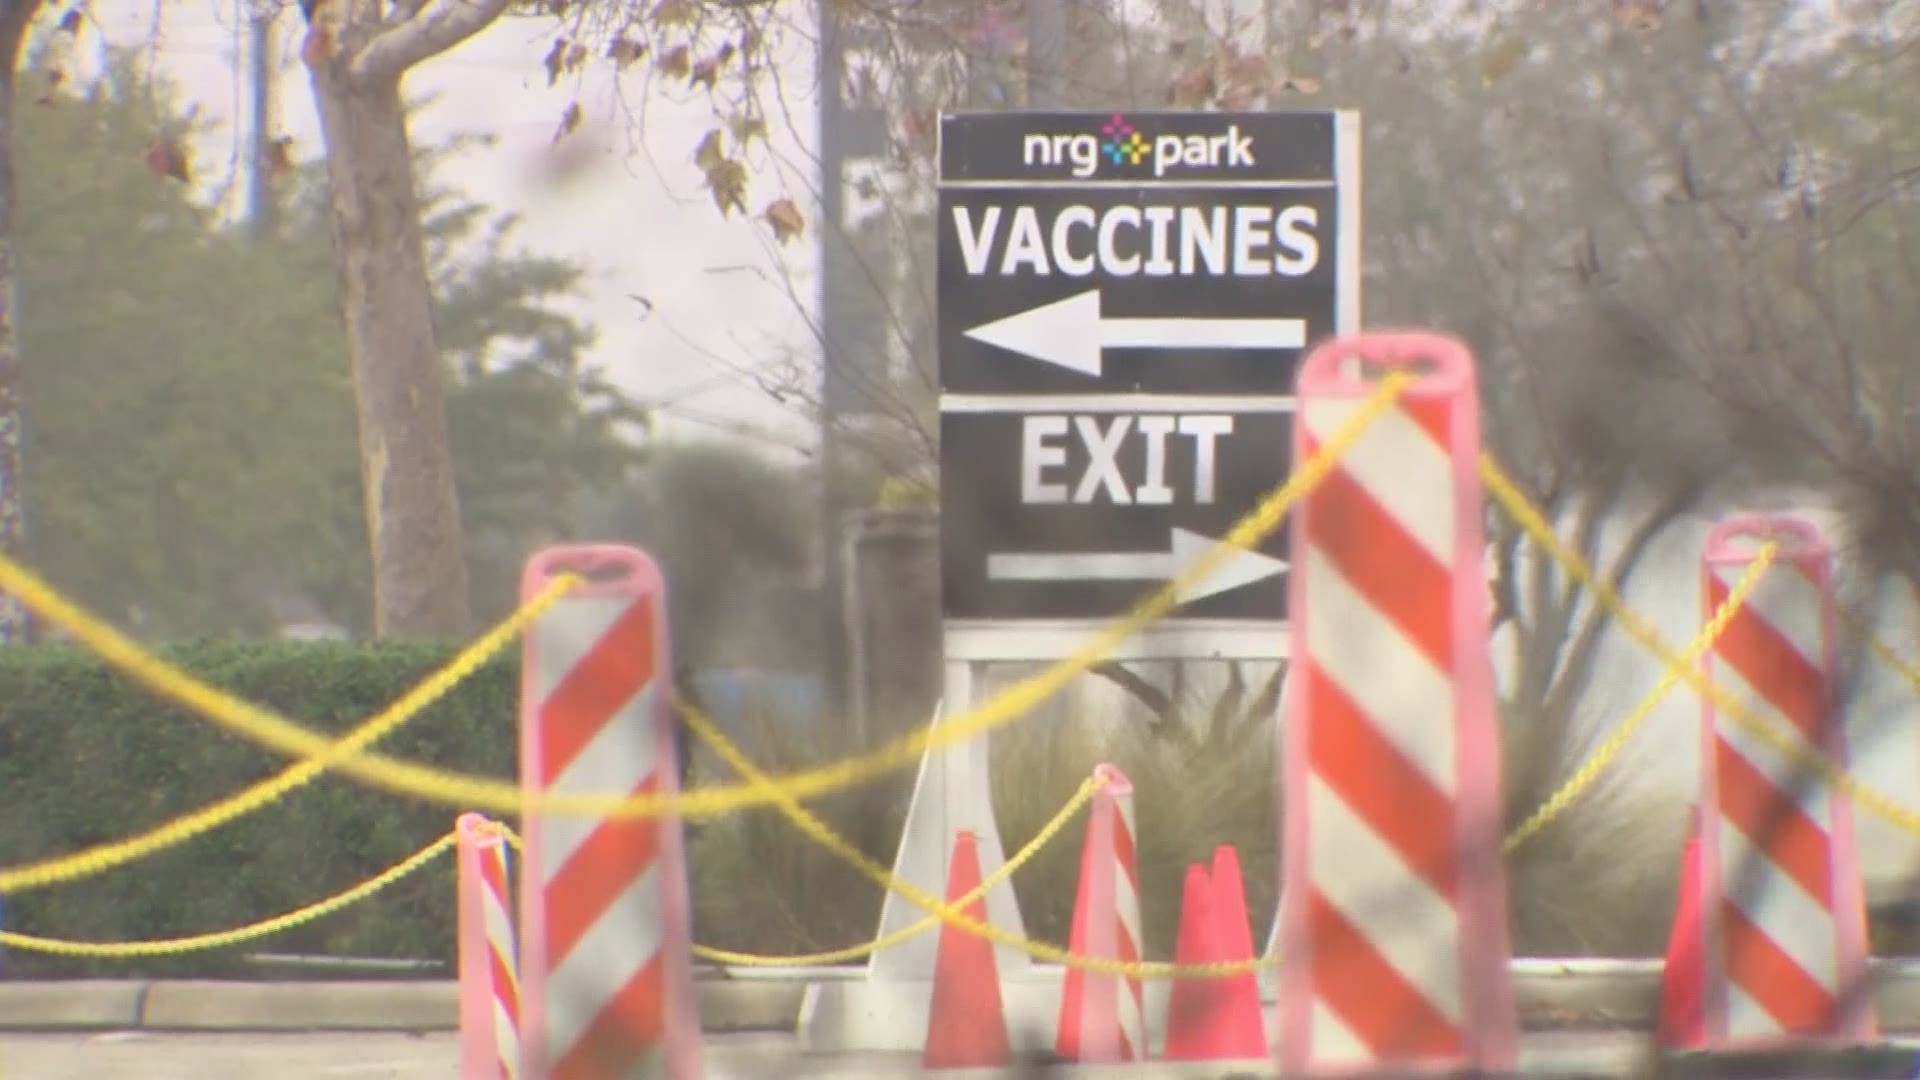 The Community Vaccination Center at NRG is expected to be up and running by February 22, according to the White House.